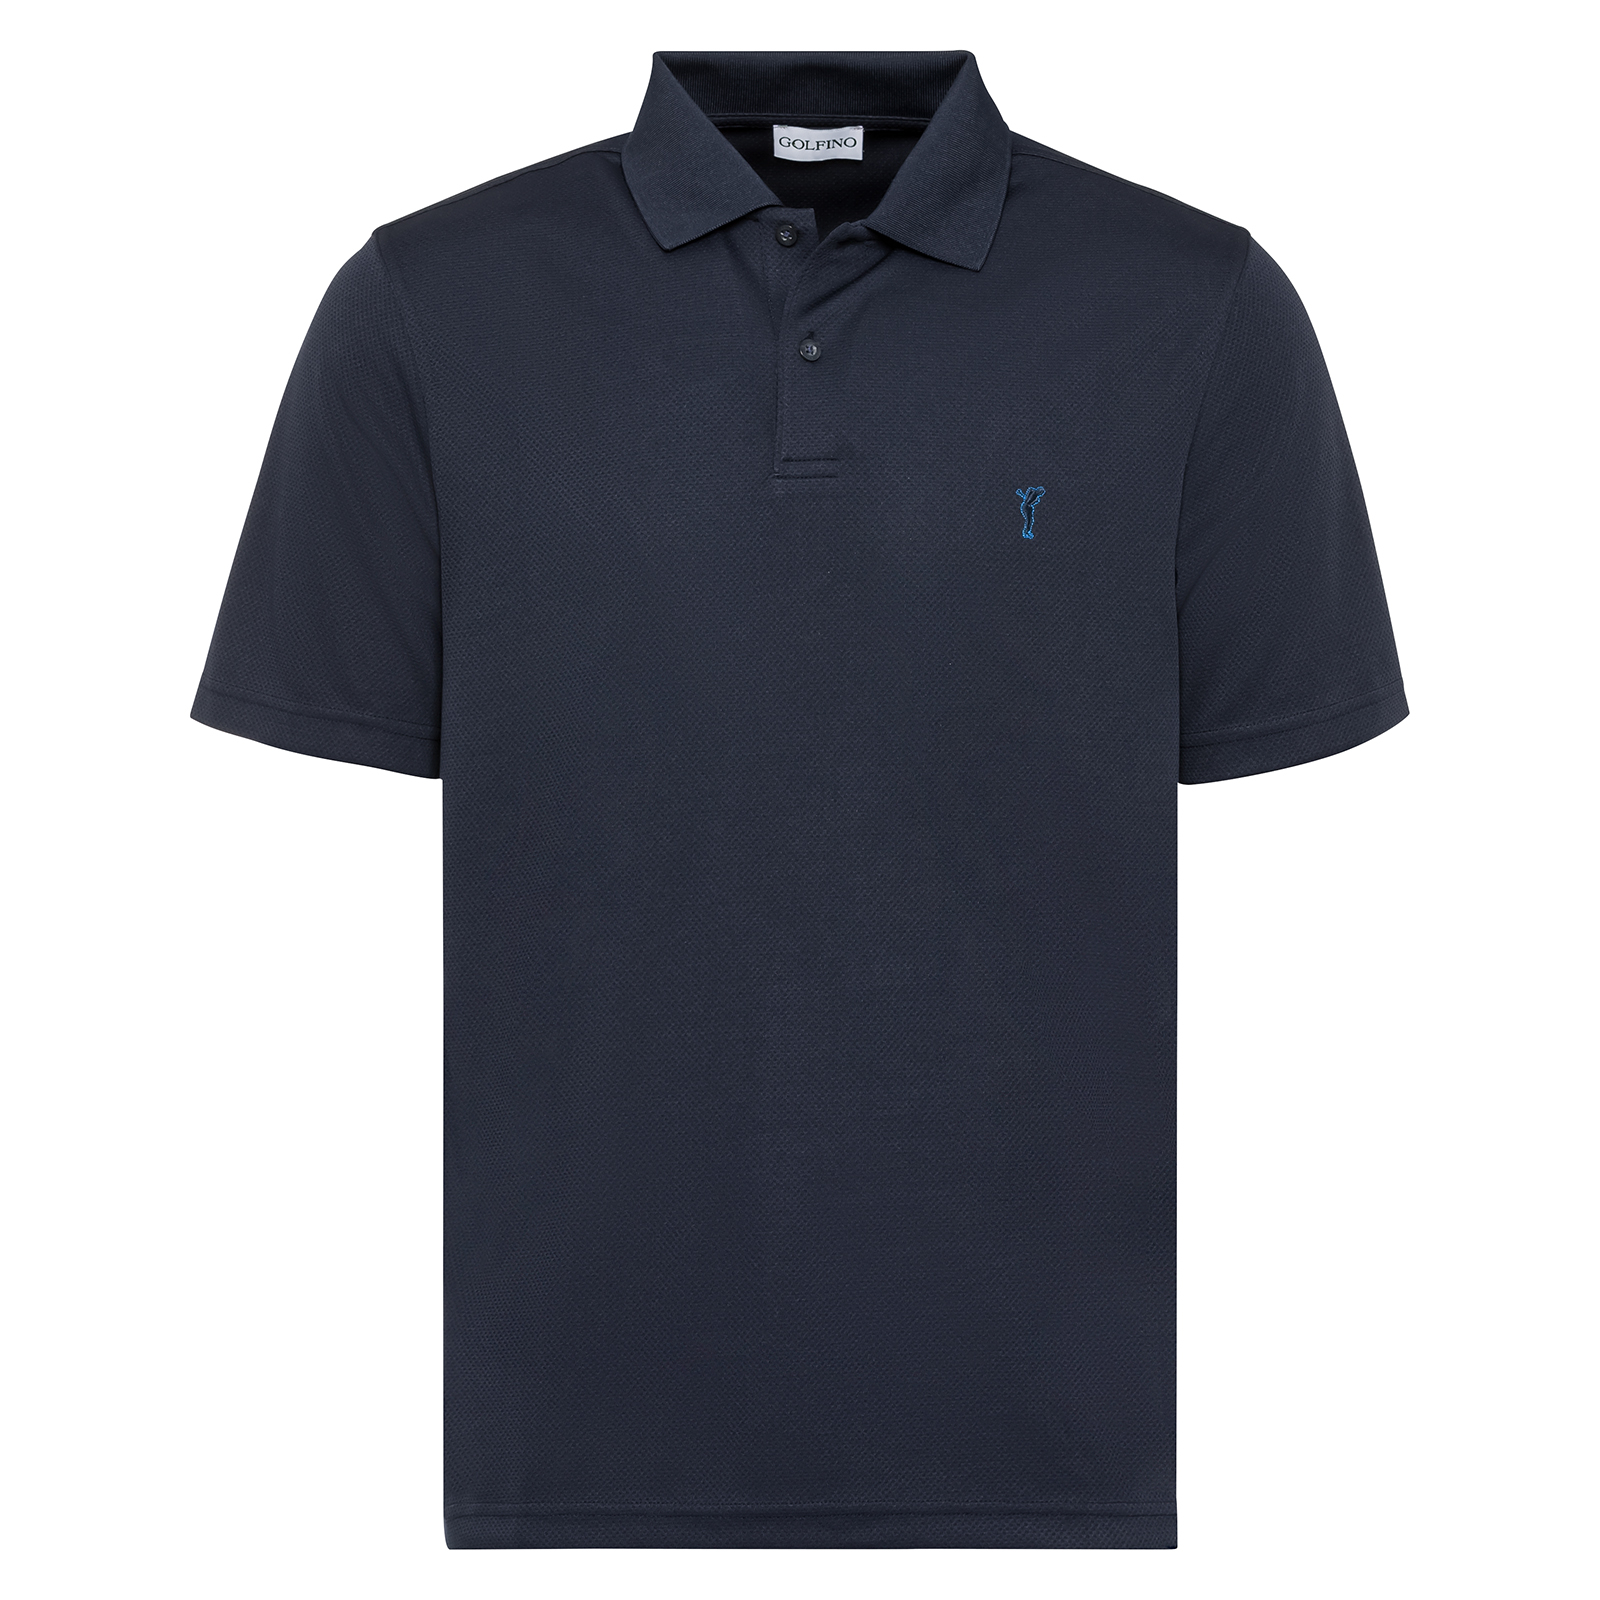 Men's golf polo made from antibacterial, moisture-regulating material